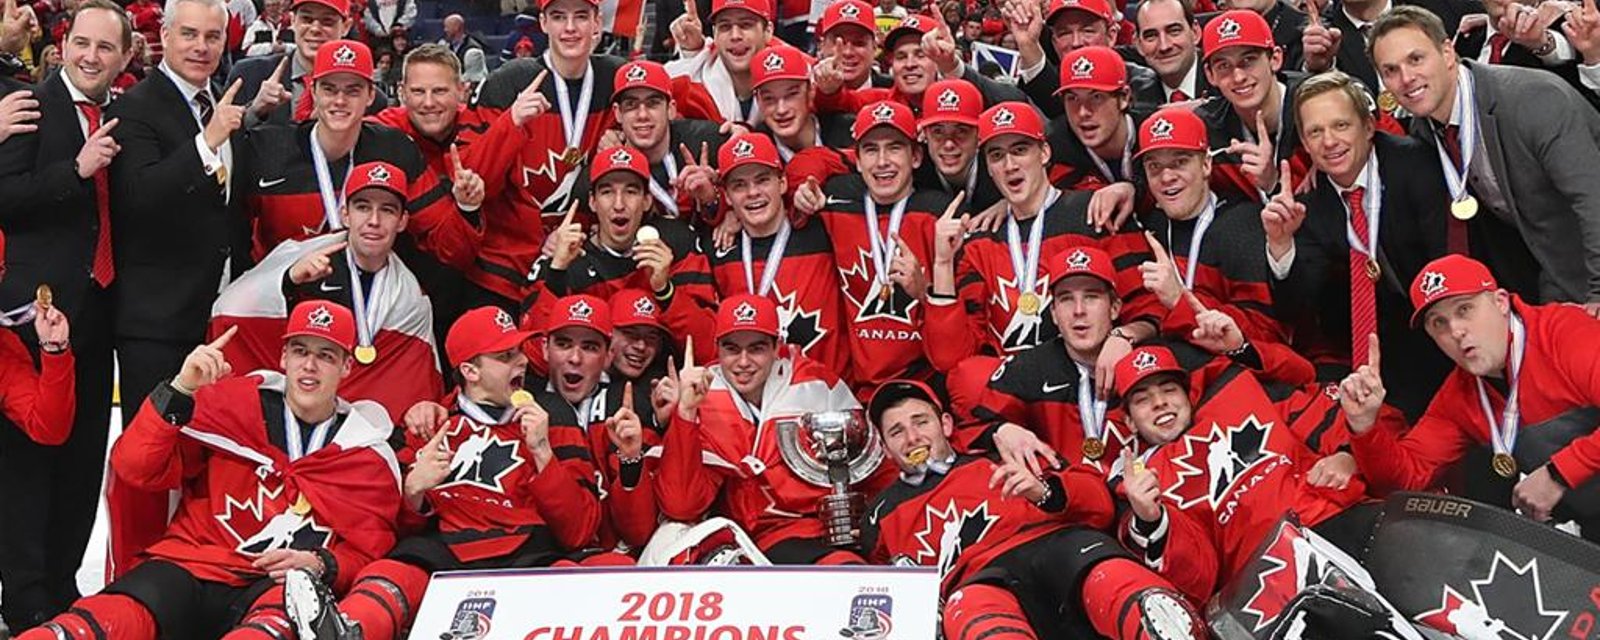 Hockey Canada faces huge consequence following disturbing gang rape allegations